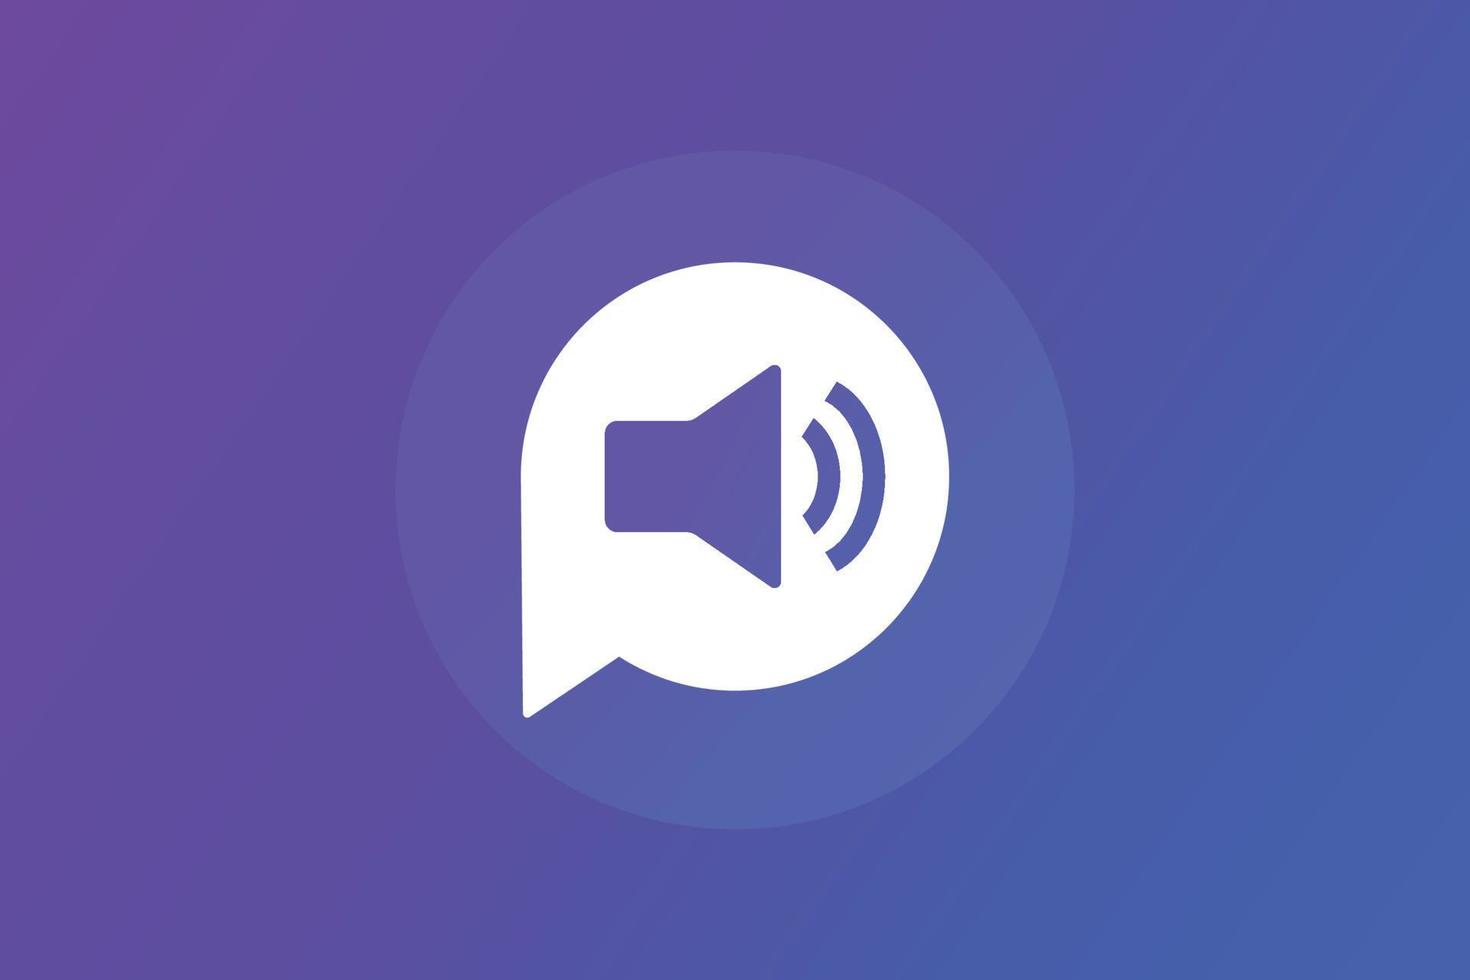 Speaker sound on button with speech bubble vector icon